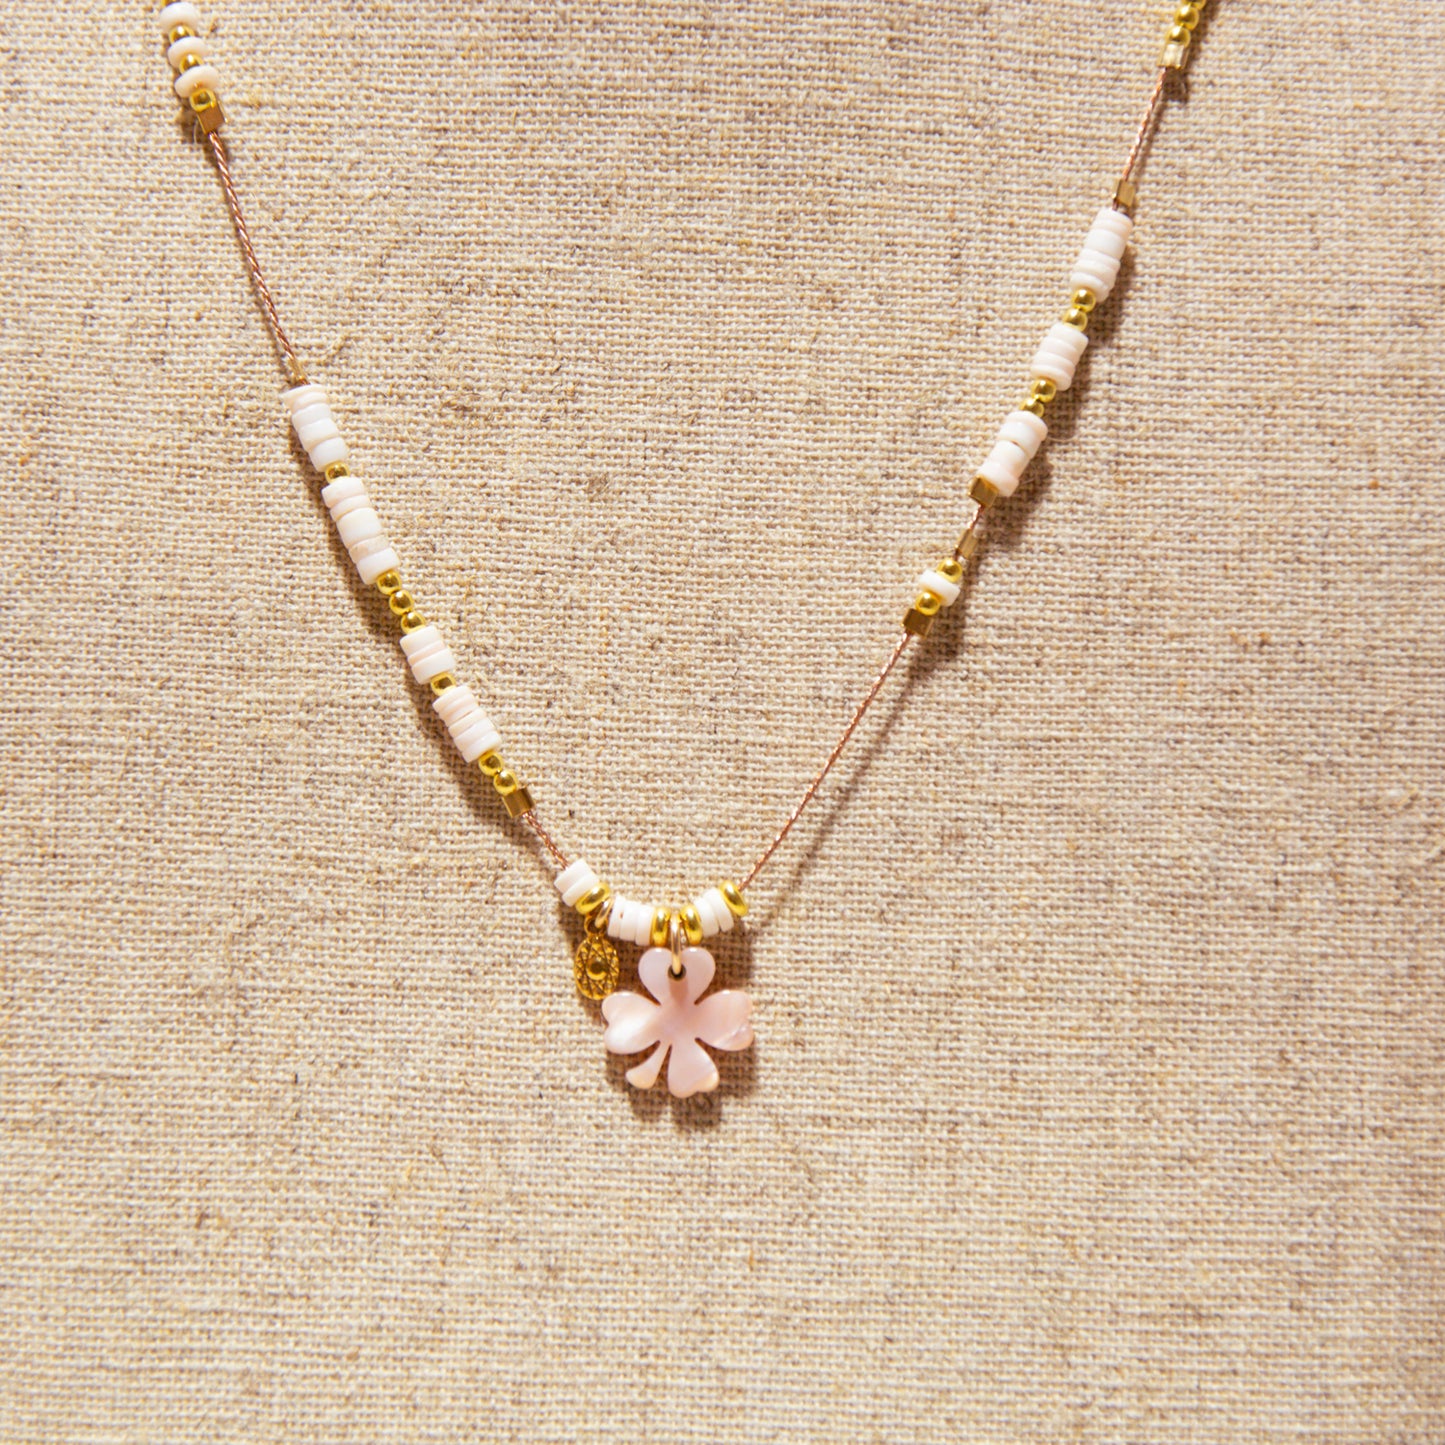 Prestige Collection Long Necklace - Pink Woven Lurex Cord - Mother-of-Pearl Clover